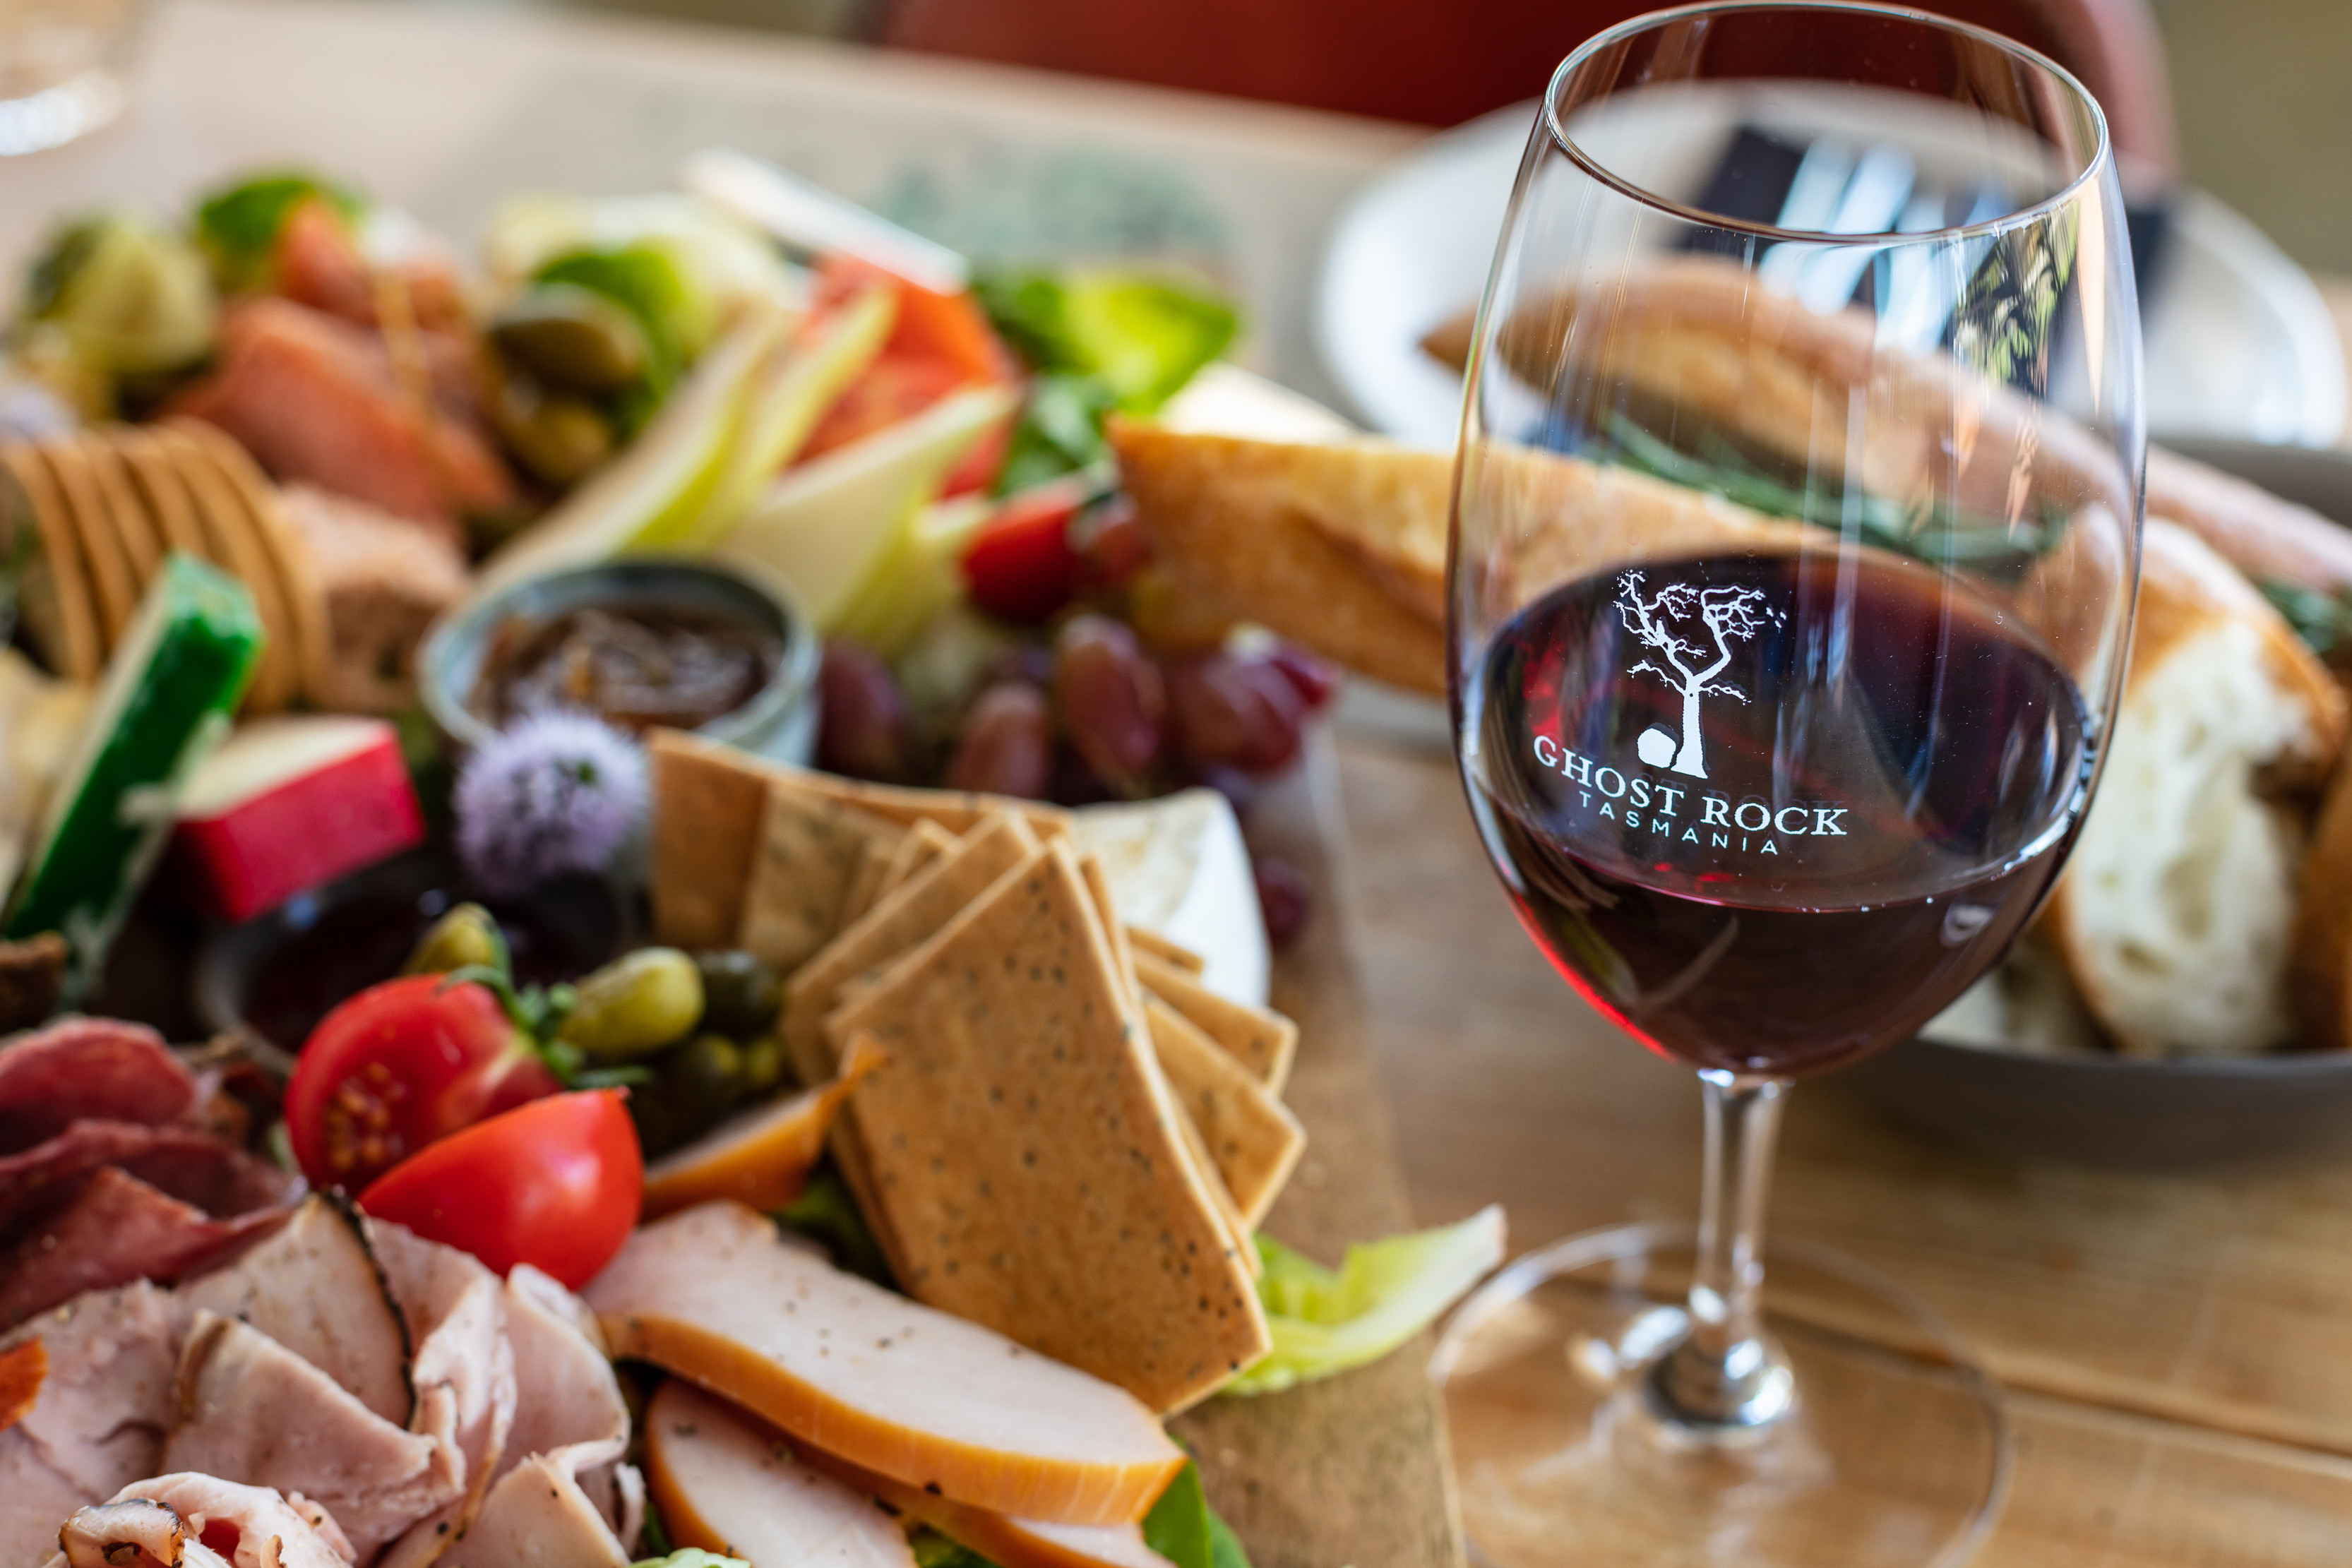 A vibrant, close up image of a platter with a variety of fresh food and red wine.